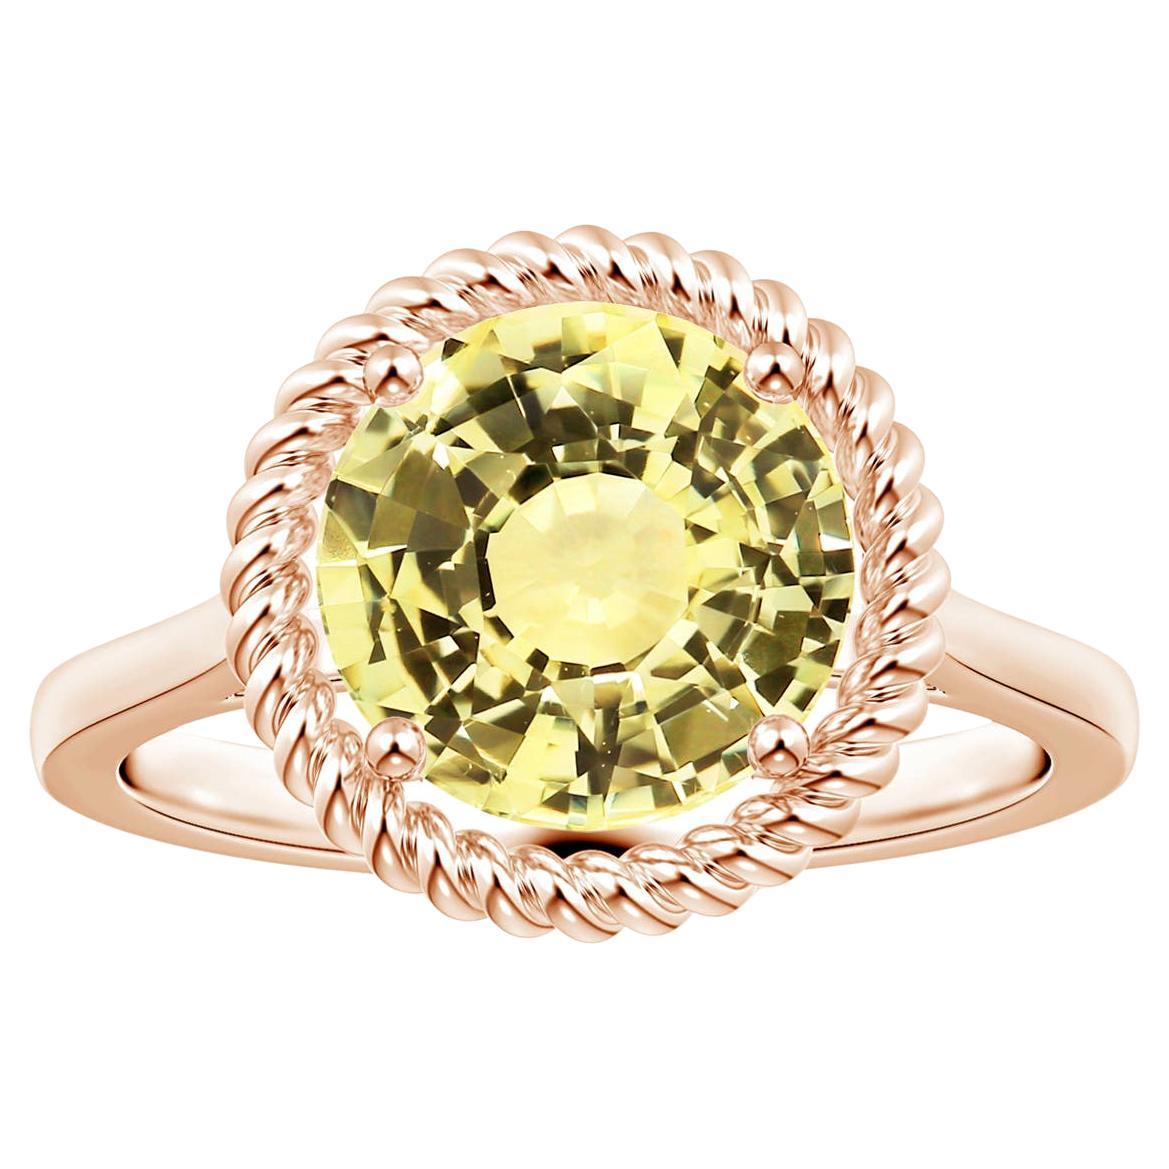 For Sale:  Angara Gia Certified Natural Yellow Sapphire Halo Ring in Rose Gold